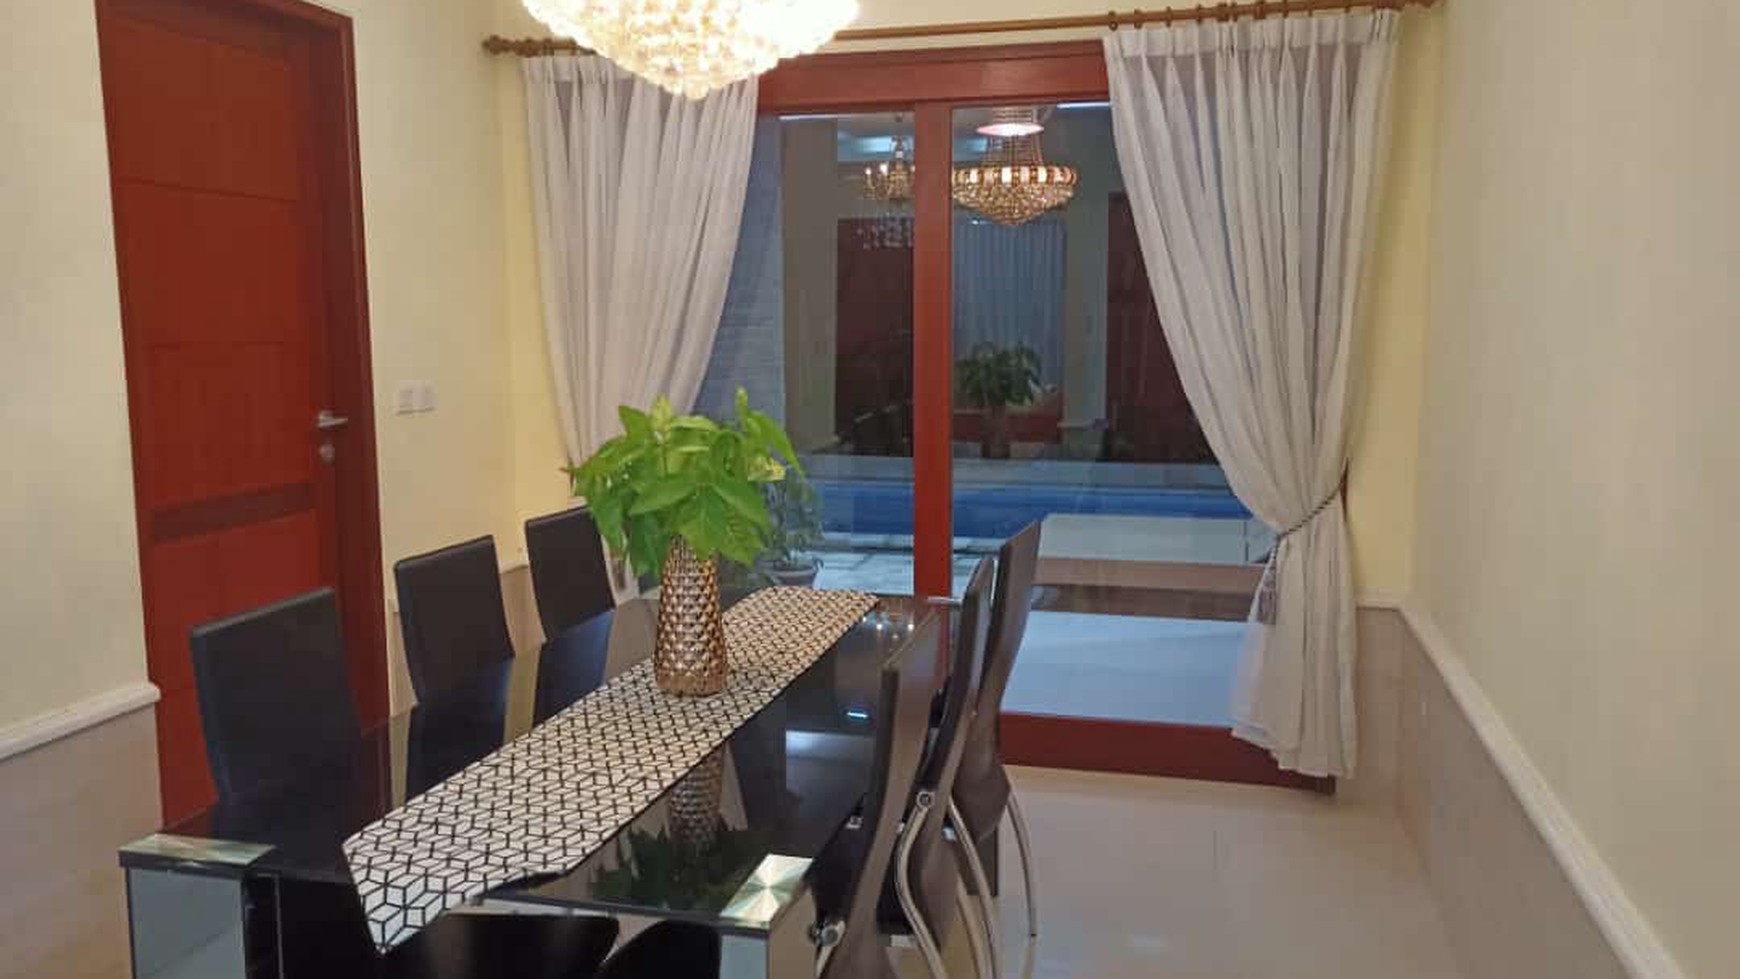 For Rent Yearly 3 Bed Room Villa in Jimbaran